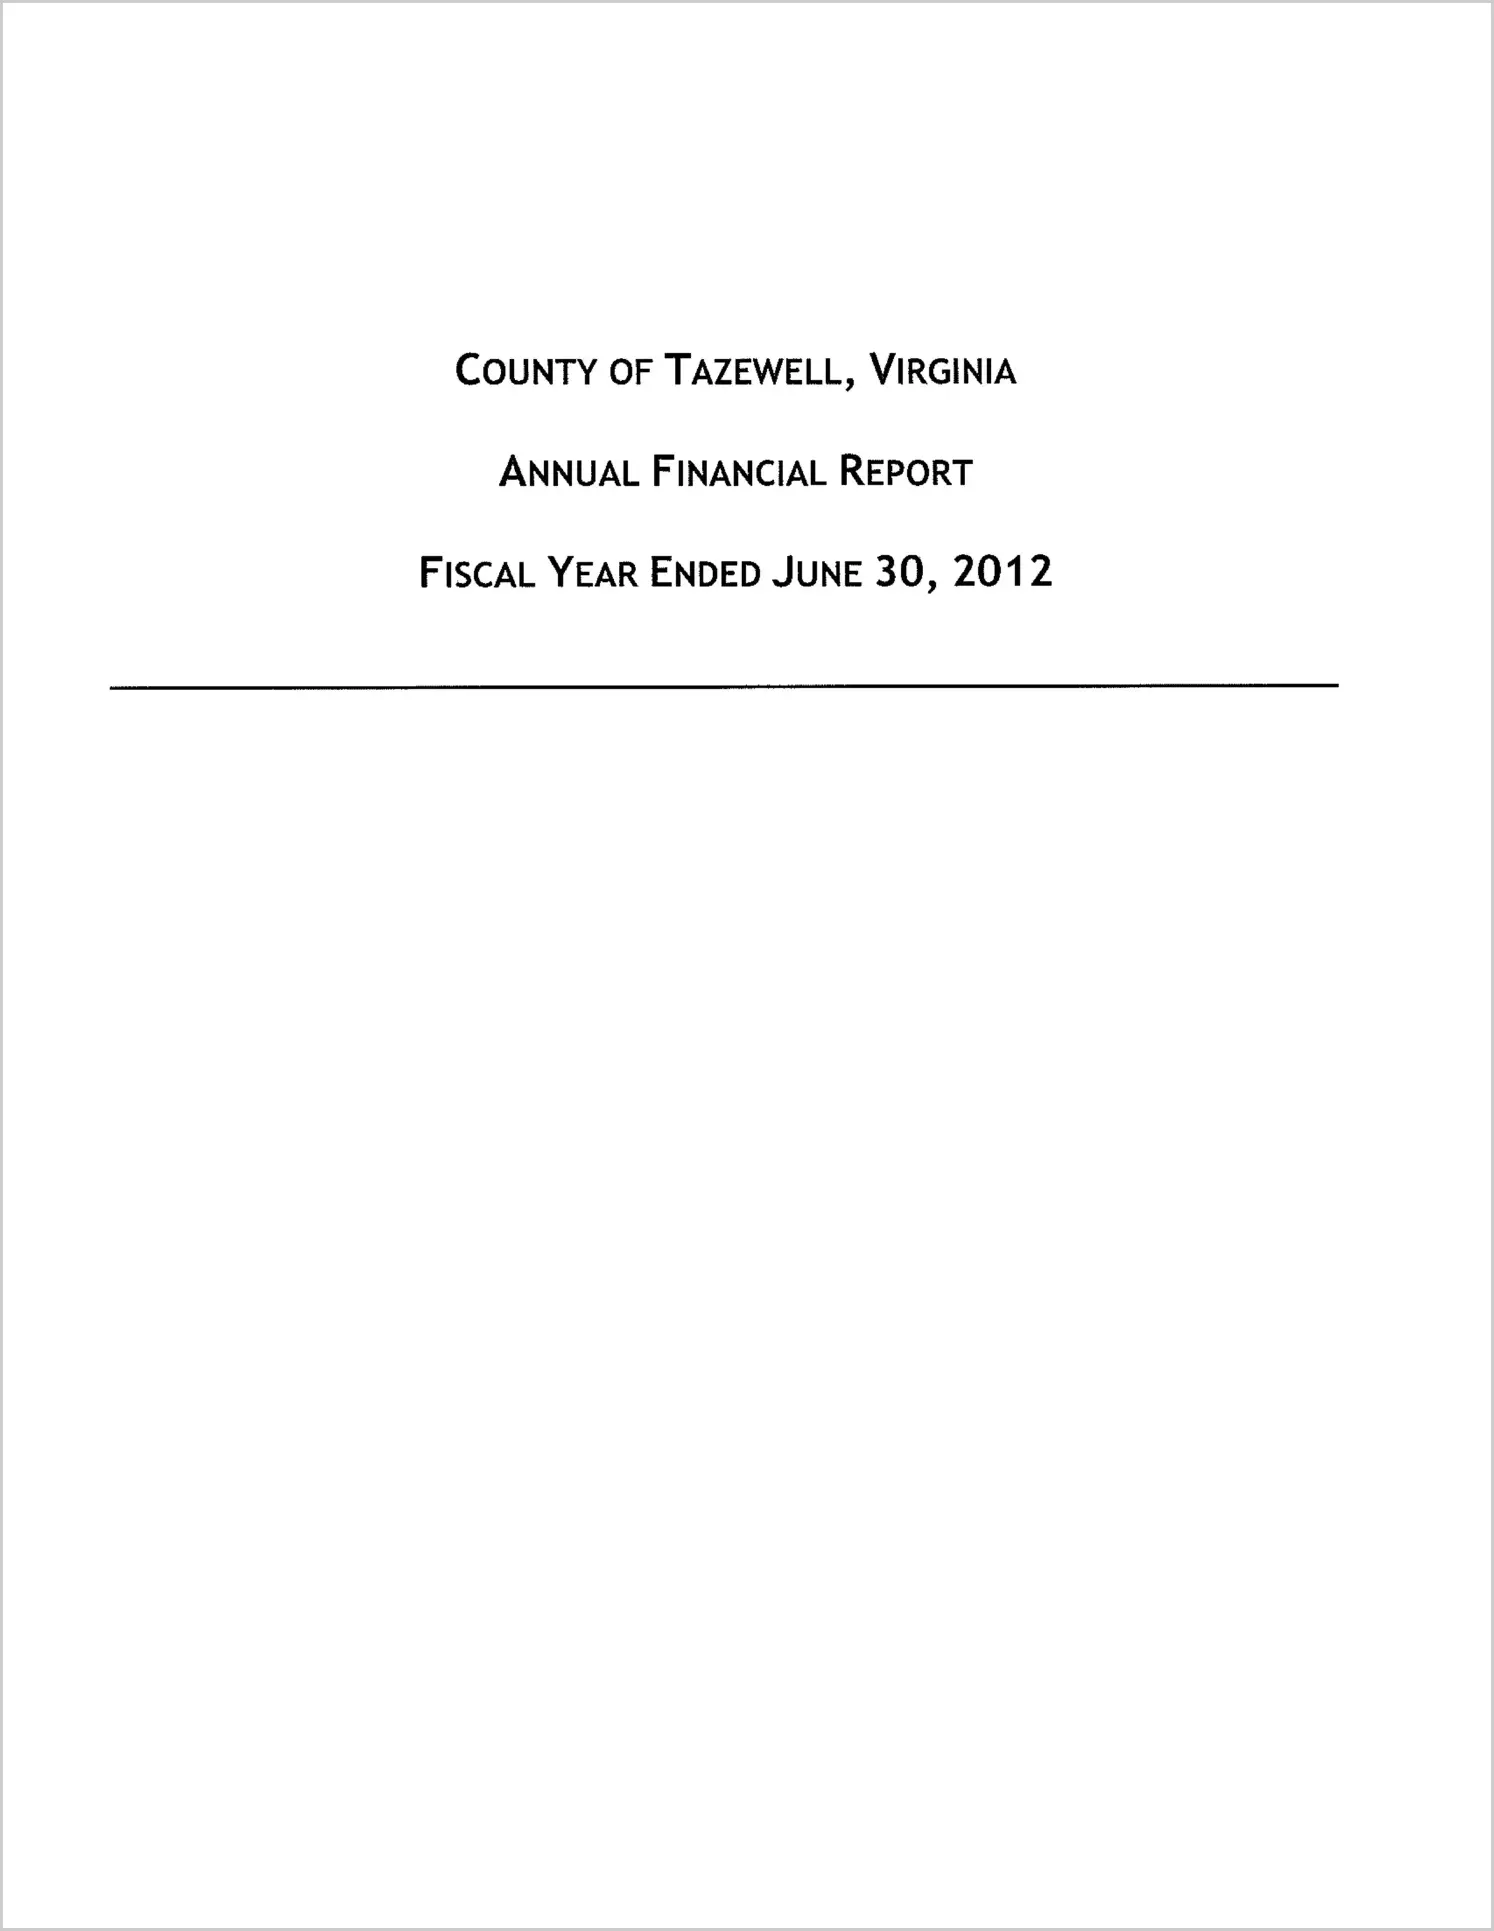 2012 Annual Financial Report for County of Tazewell